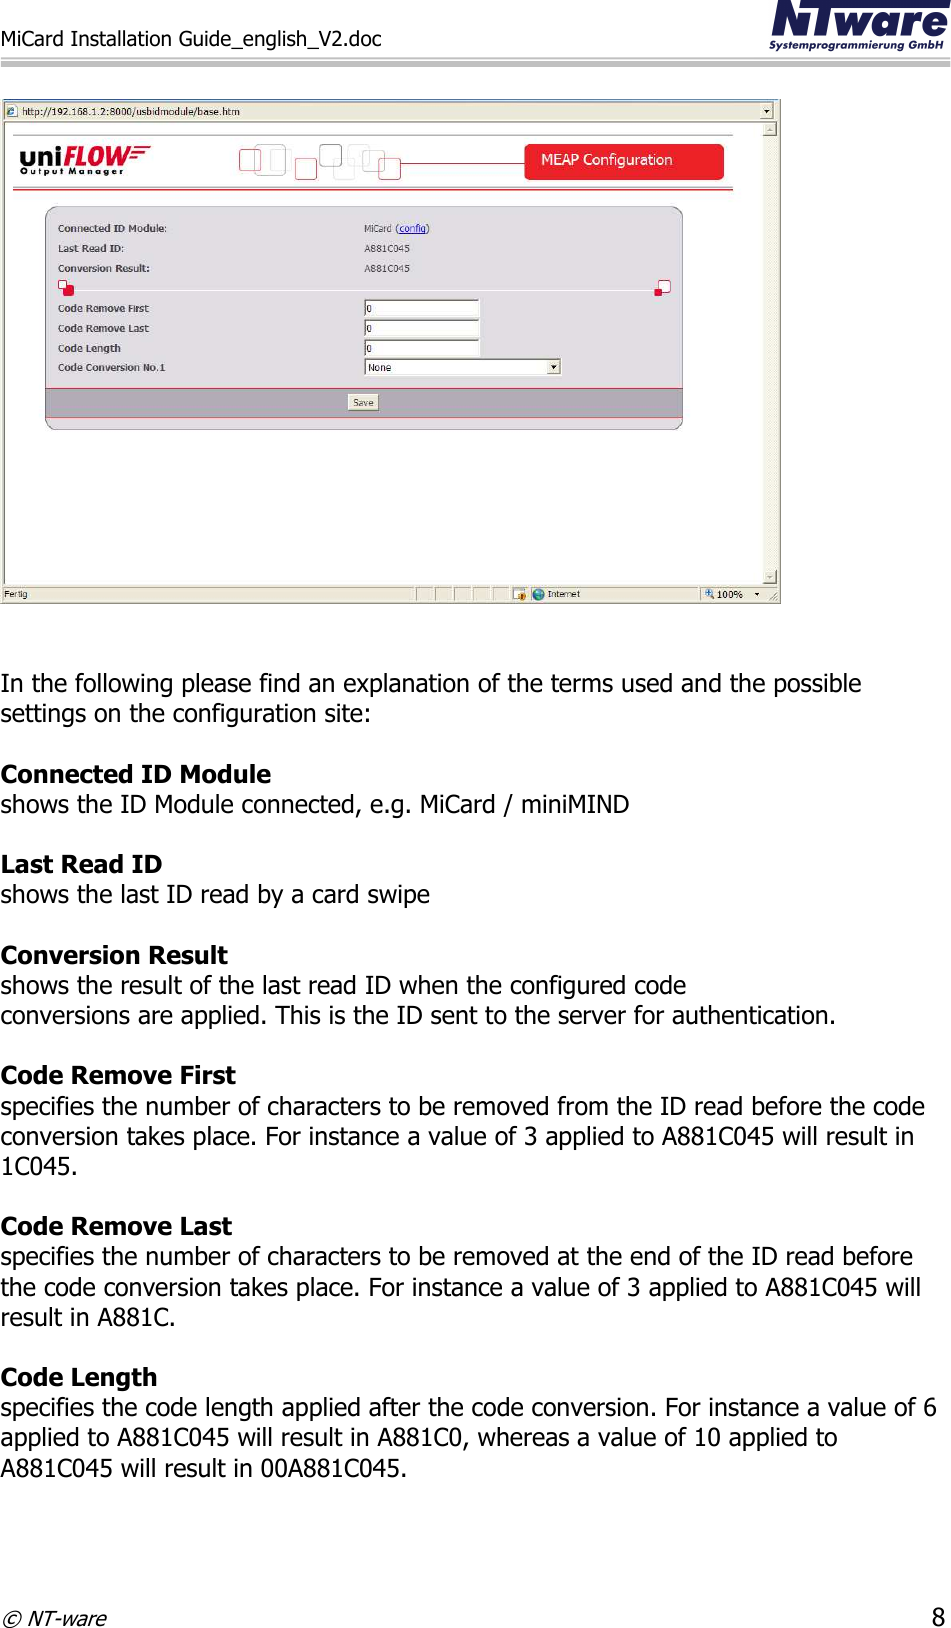 MiCard Installation Guide_english_V2.doc     © NT-ware 8     In the following please find an explanation of the terms used and the possible settings on the configuration site:   Connected ID Module  shows the ID Module connected, e.g. MiCard / miniMIND  Last Read ID  shows the last ID read by a card swipe  Conversion Result shows the result of the last read ID when the configured code  conversions are applied. This is the ID sent to the server for authentication.  Code Remove First specifies the number of characters to be removed from the ID read before the code conversion takes place. For instance a value of 3 applied to A881C045 will result in 1C045.  Code Remove Last specifies the number of characters to be removed at the end of the ID read before the code conversion takes place. For instance a value of 3 applied to A881C045 will result in A881C.  Code Length specifies the code length applied after the code conversion. For instance a value of 6 applied to A881C045 will result in A881C0, whereas a value of 10 applied to A881C045 will result in 00A881C045.   